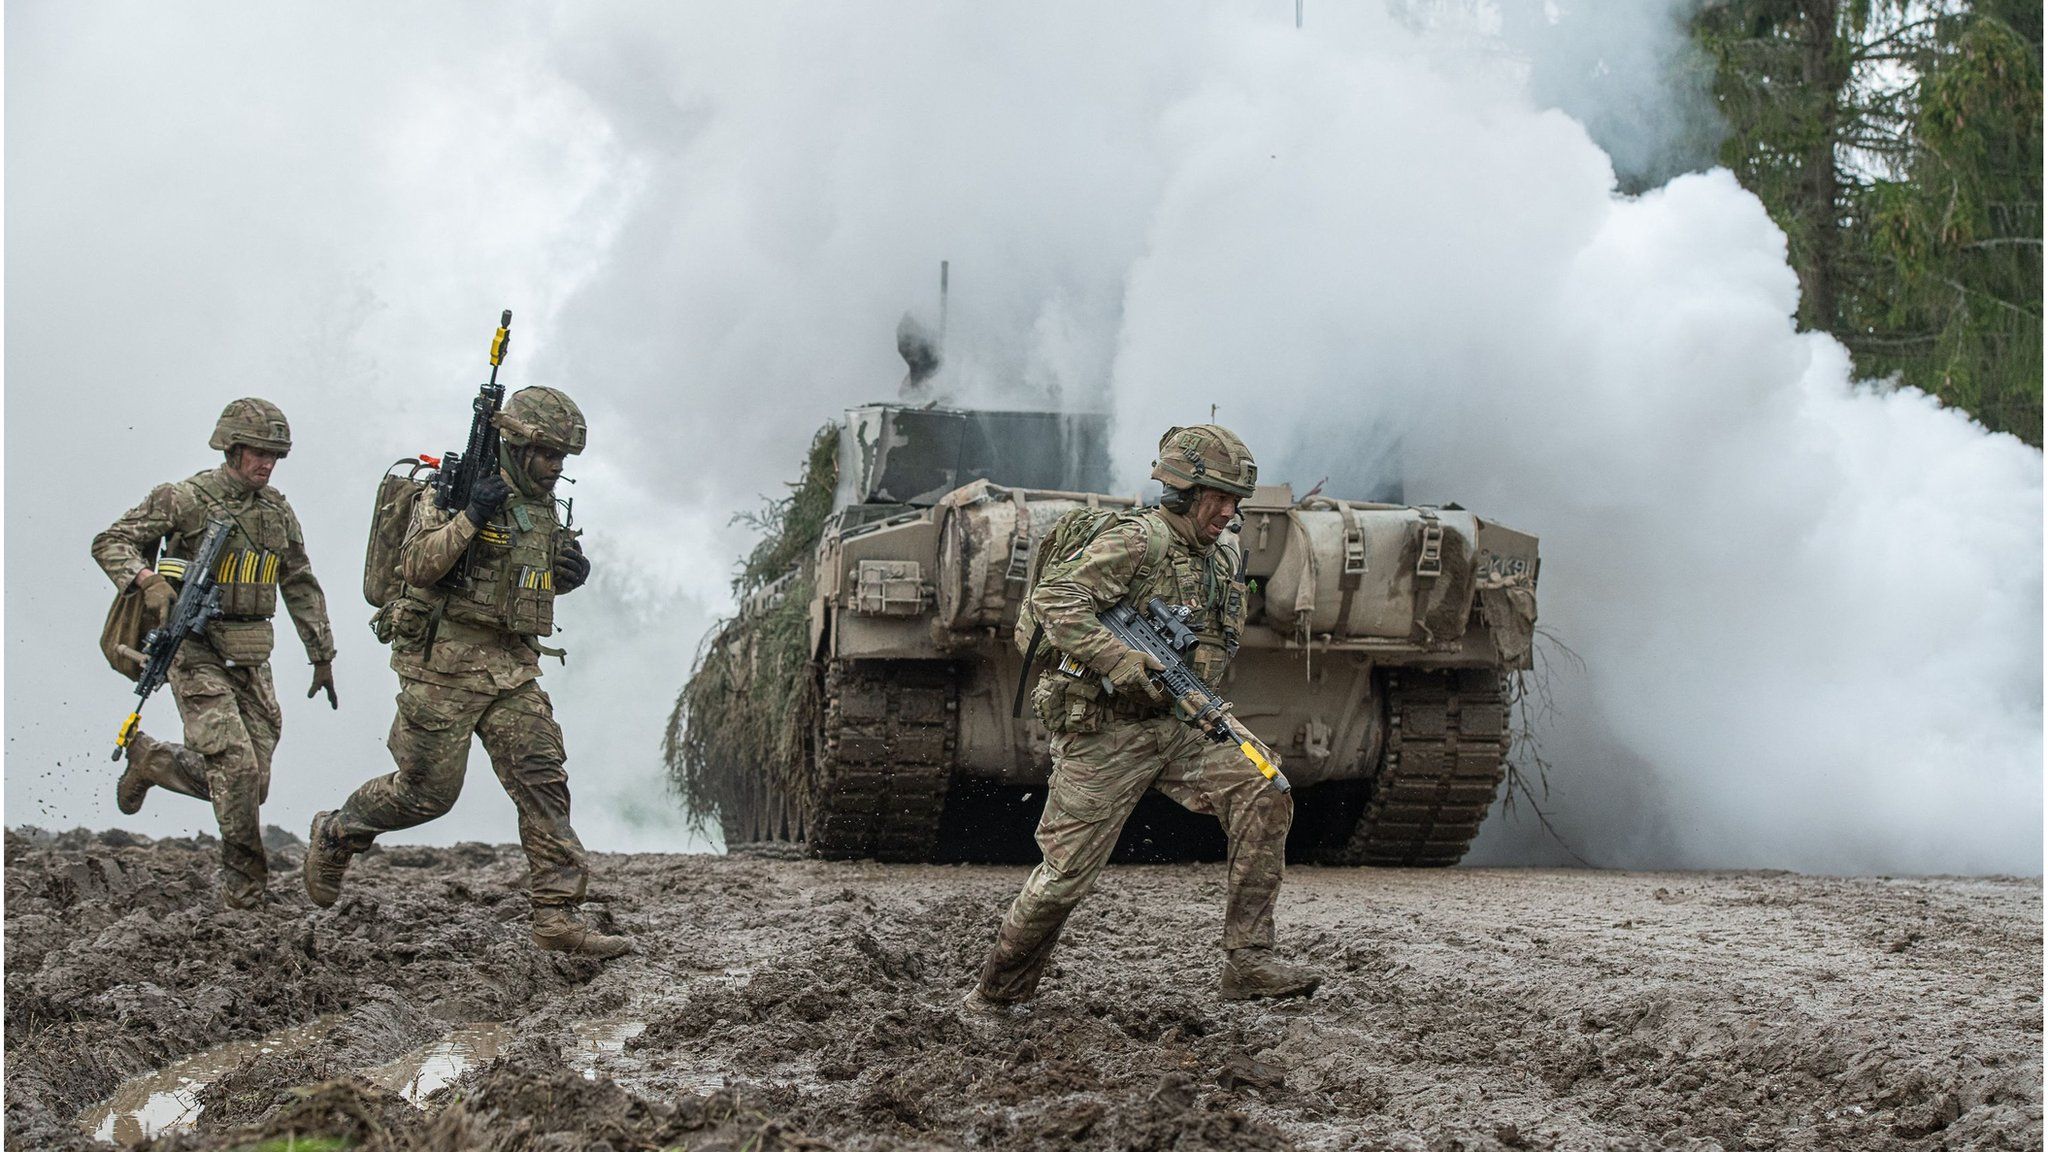 Soldiers from Nato countries taking part in an exercise in Estonia, 2021